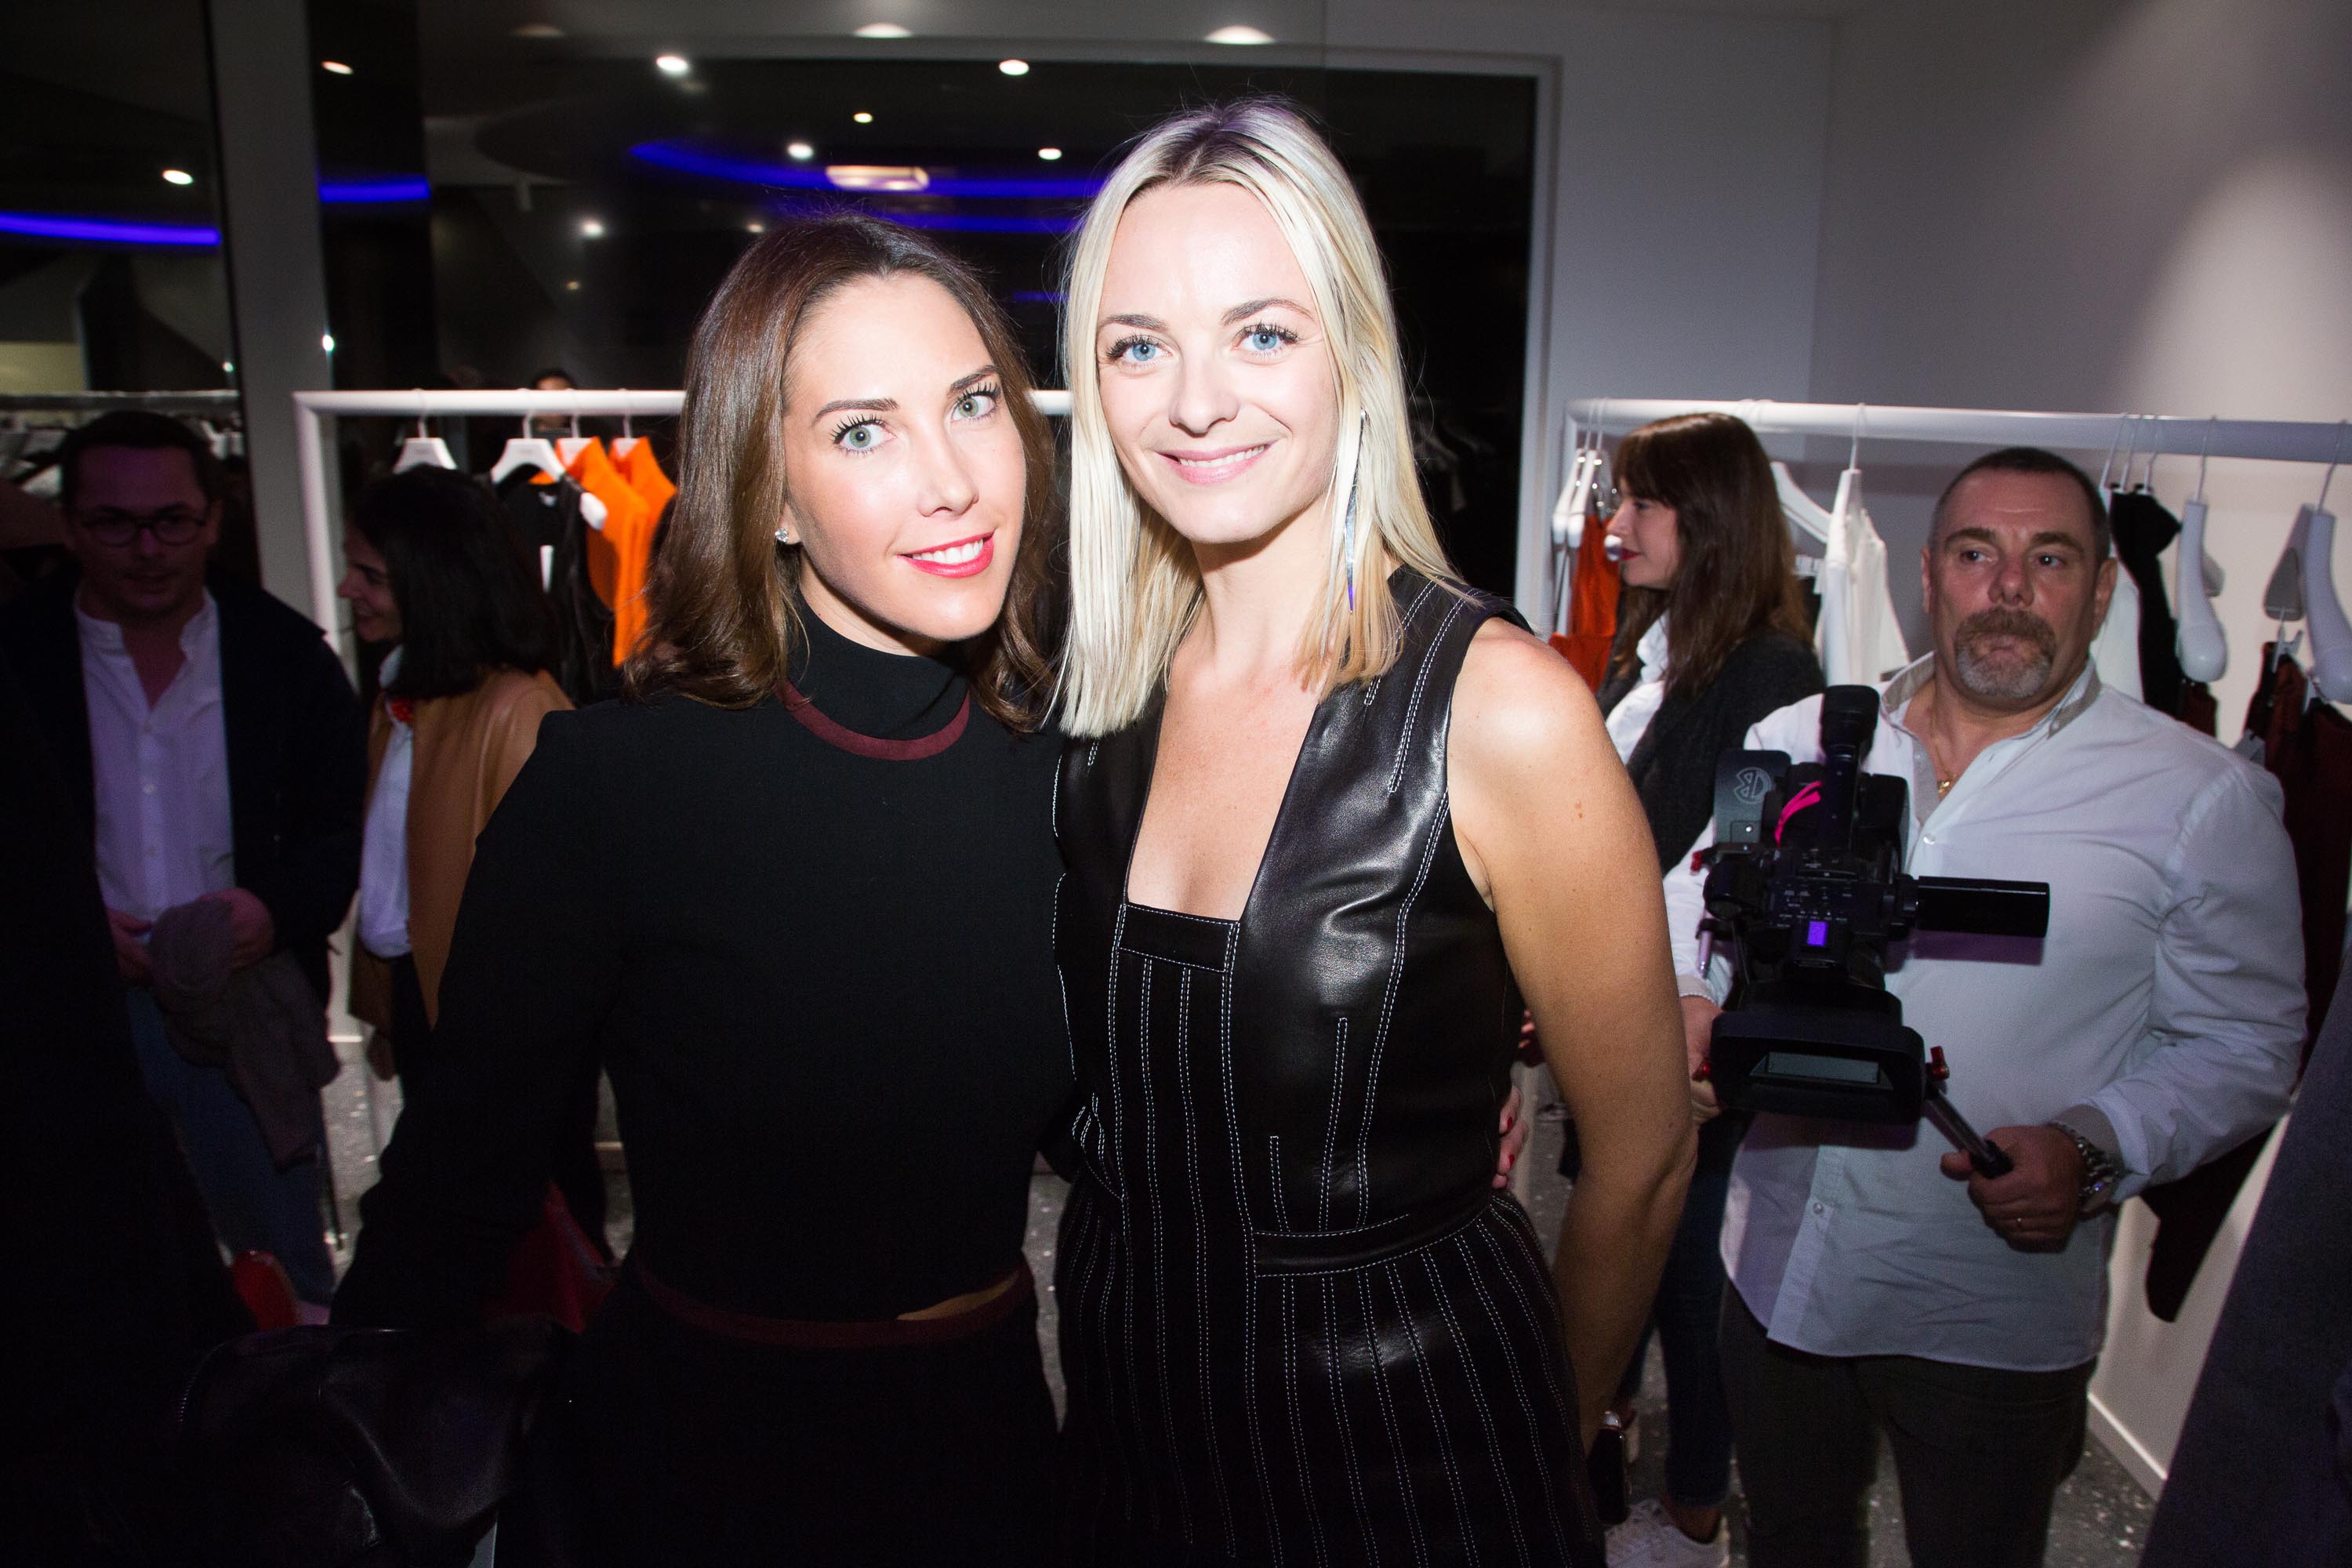 Virginie Courtin Clarins attends the Mugler Paris Store Party